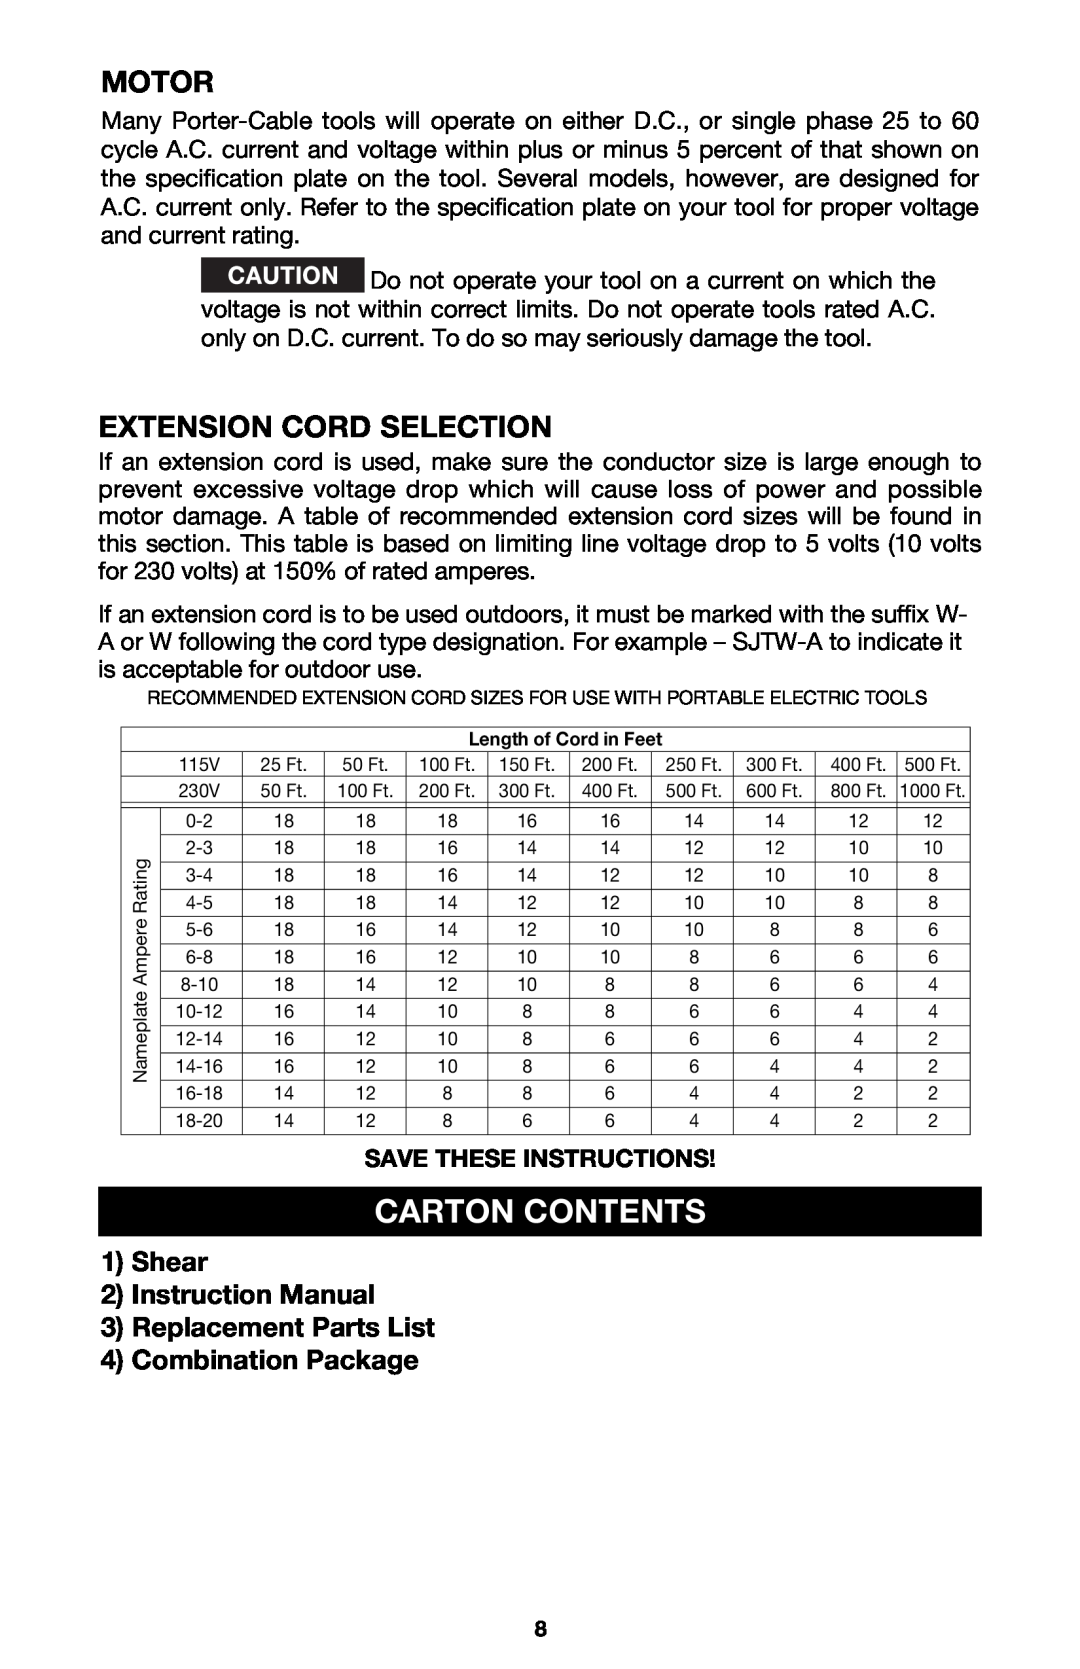 Porter-Cable 6603 instruction manual Carton Contents, Motor, Extension Cord Selection, Combination Package 